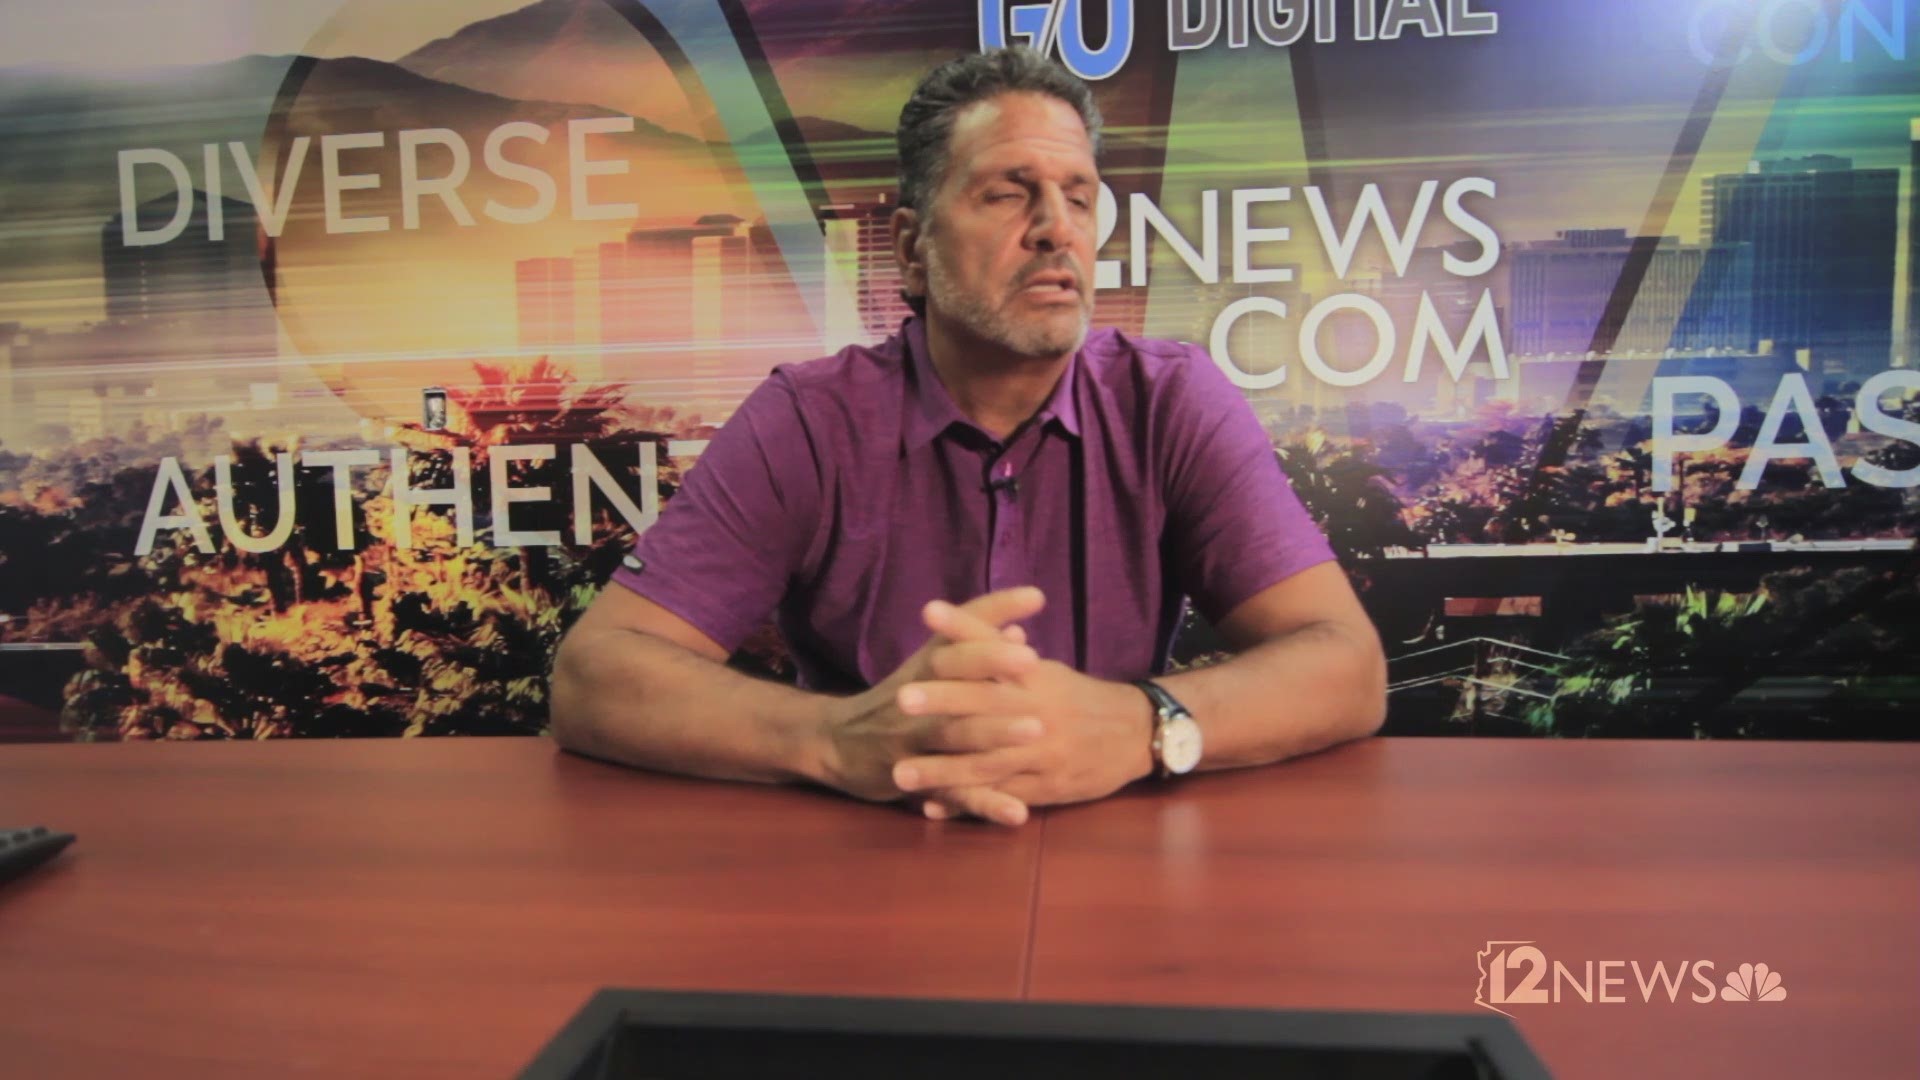 Phil Koufidakis talks about how 12 News and Baker Brothers have teamed up for success.